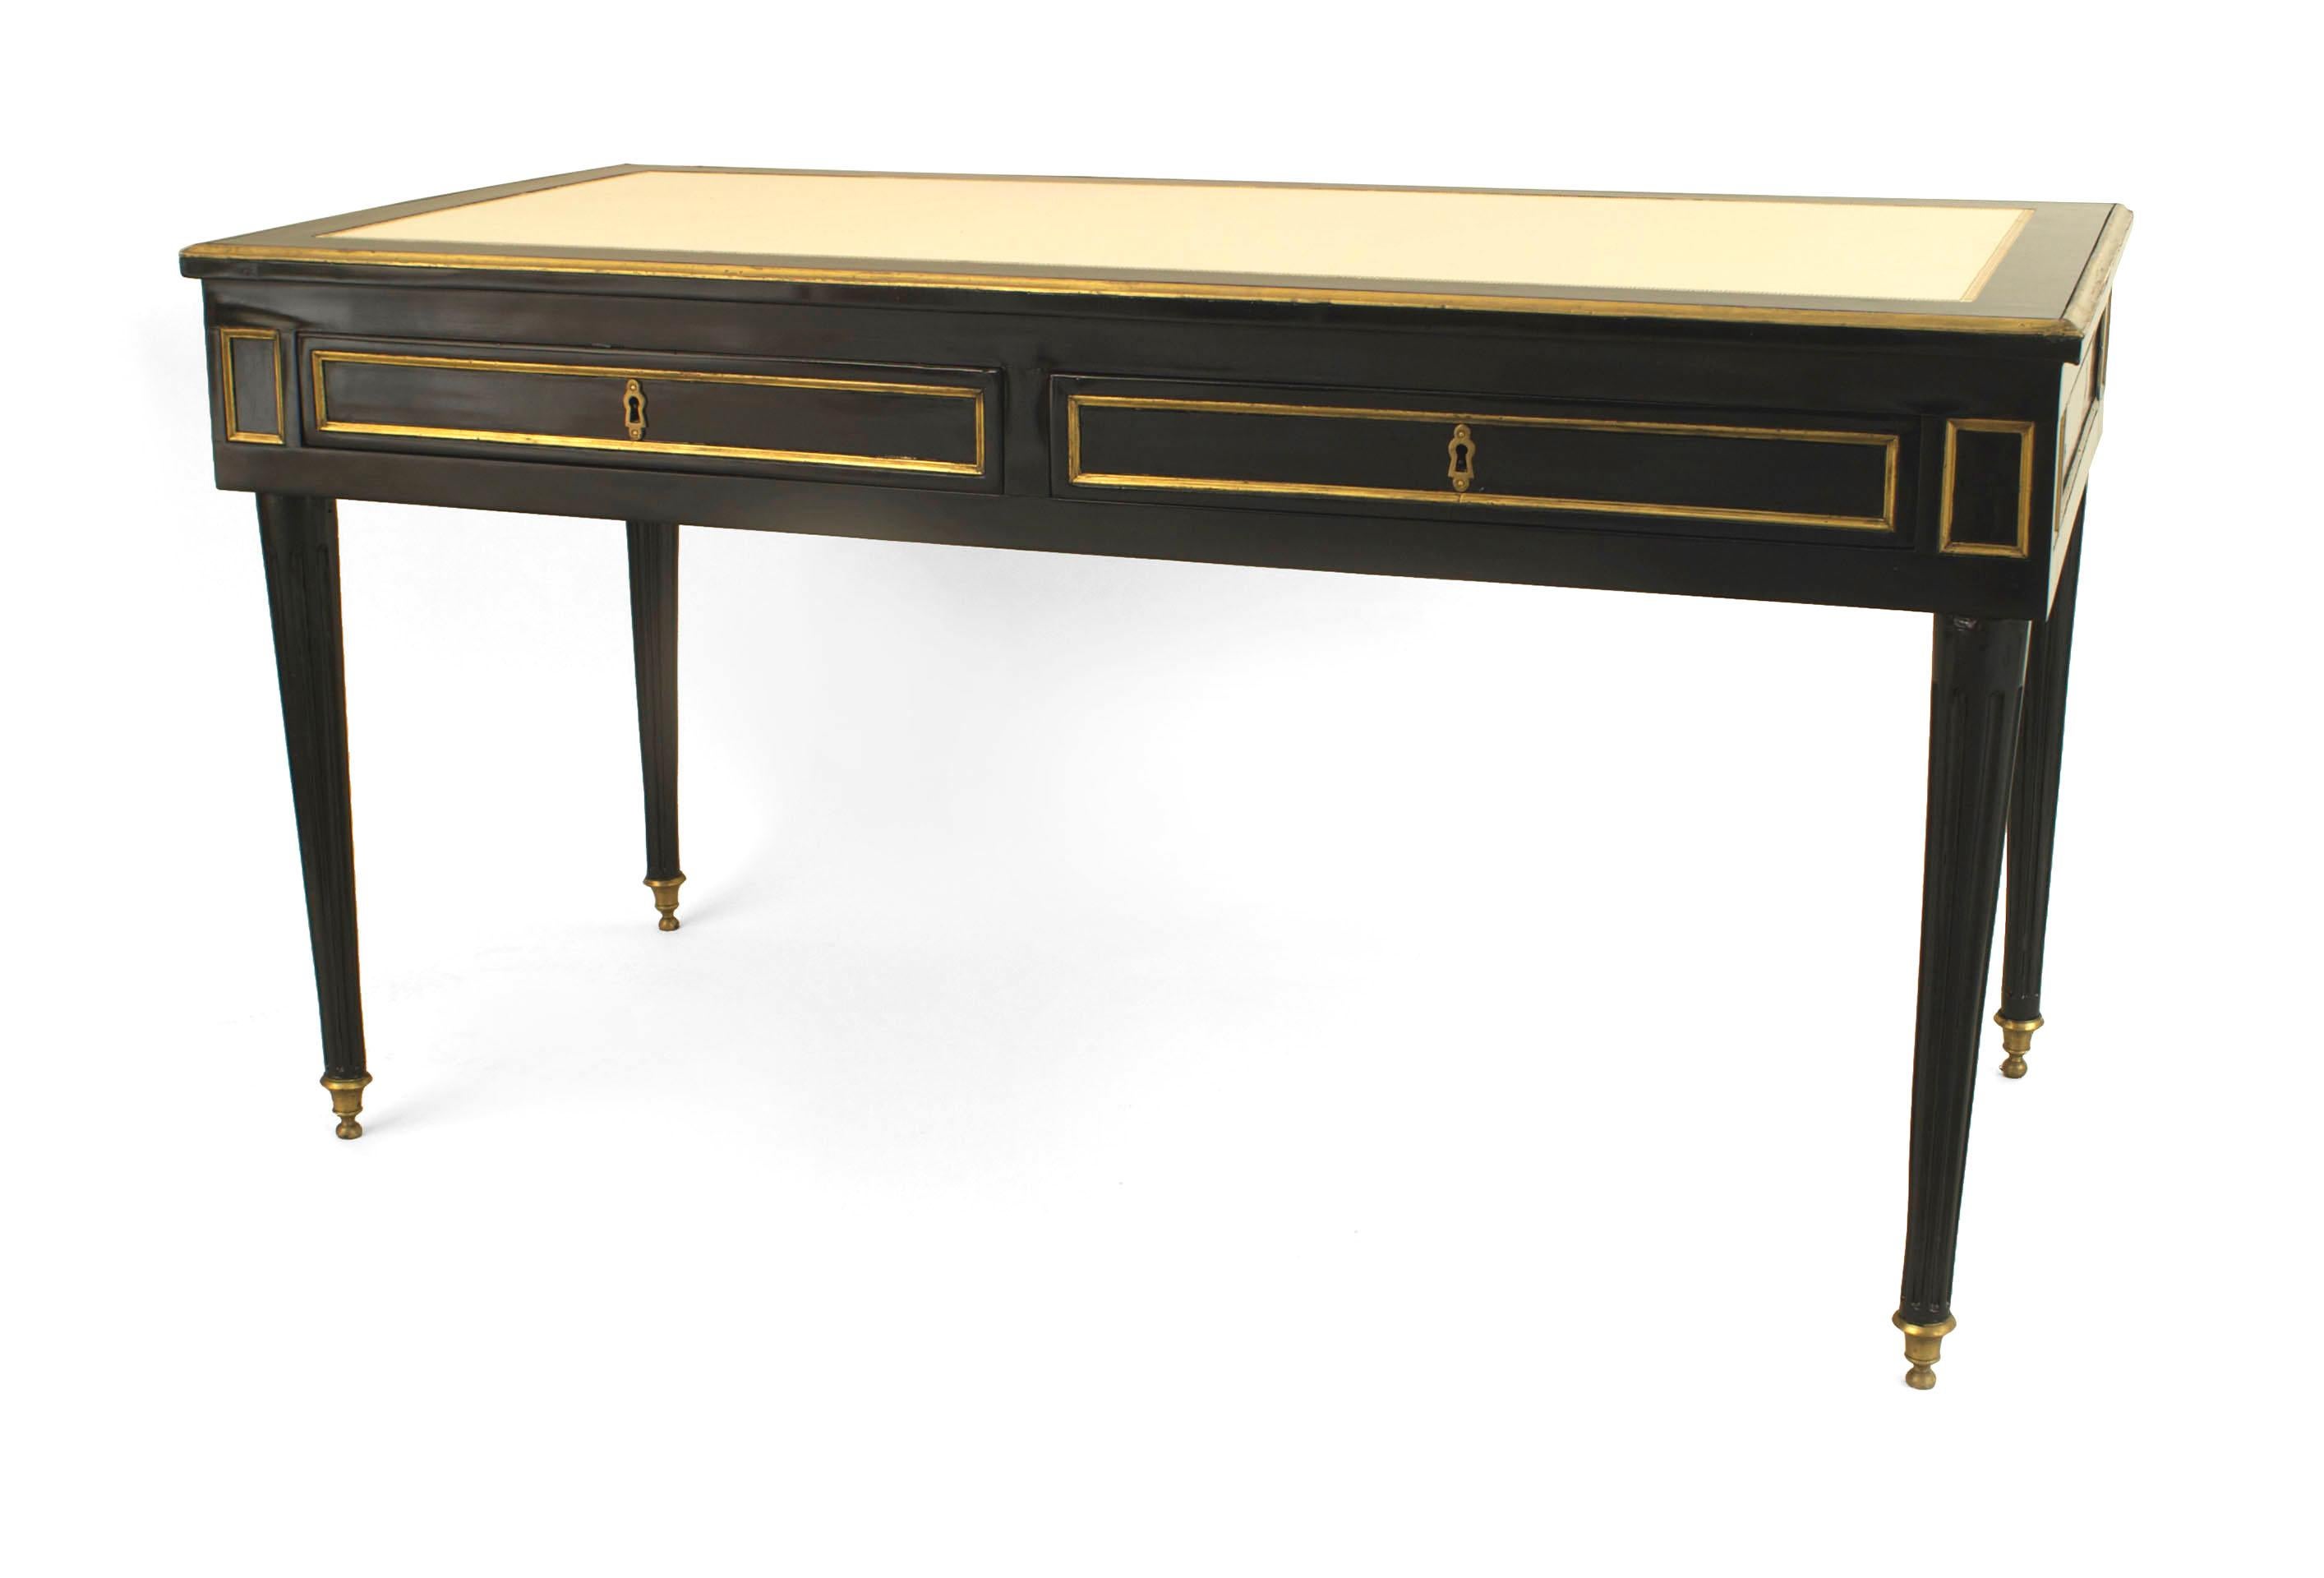 French 1940s ‘Louis XVI style’ ebonized table desk with gilt bronze trim and two large drawers under an inset leather top with a bronze edge. Attributed Jansen.

Maison Jansen was a Paris-based interior decoration office founded in 1880